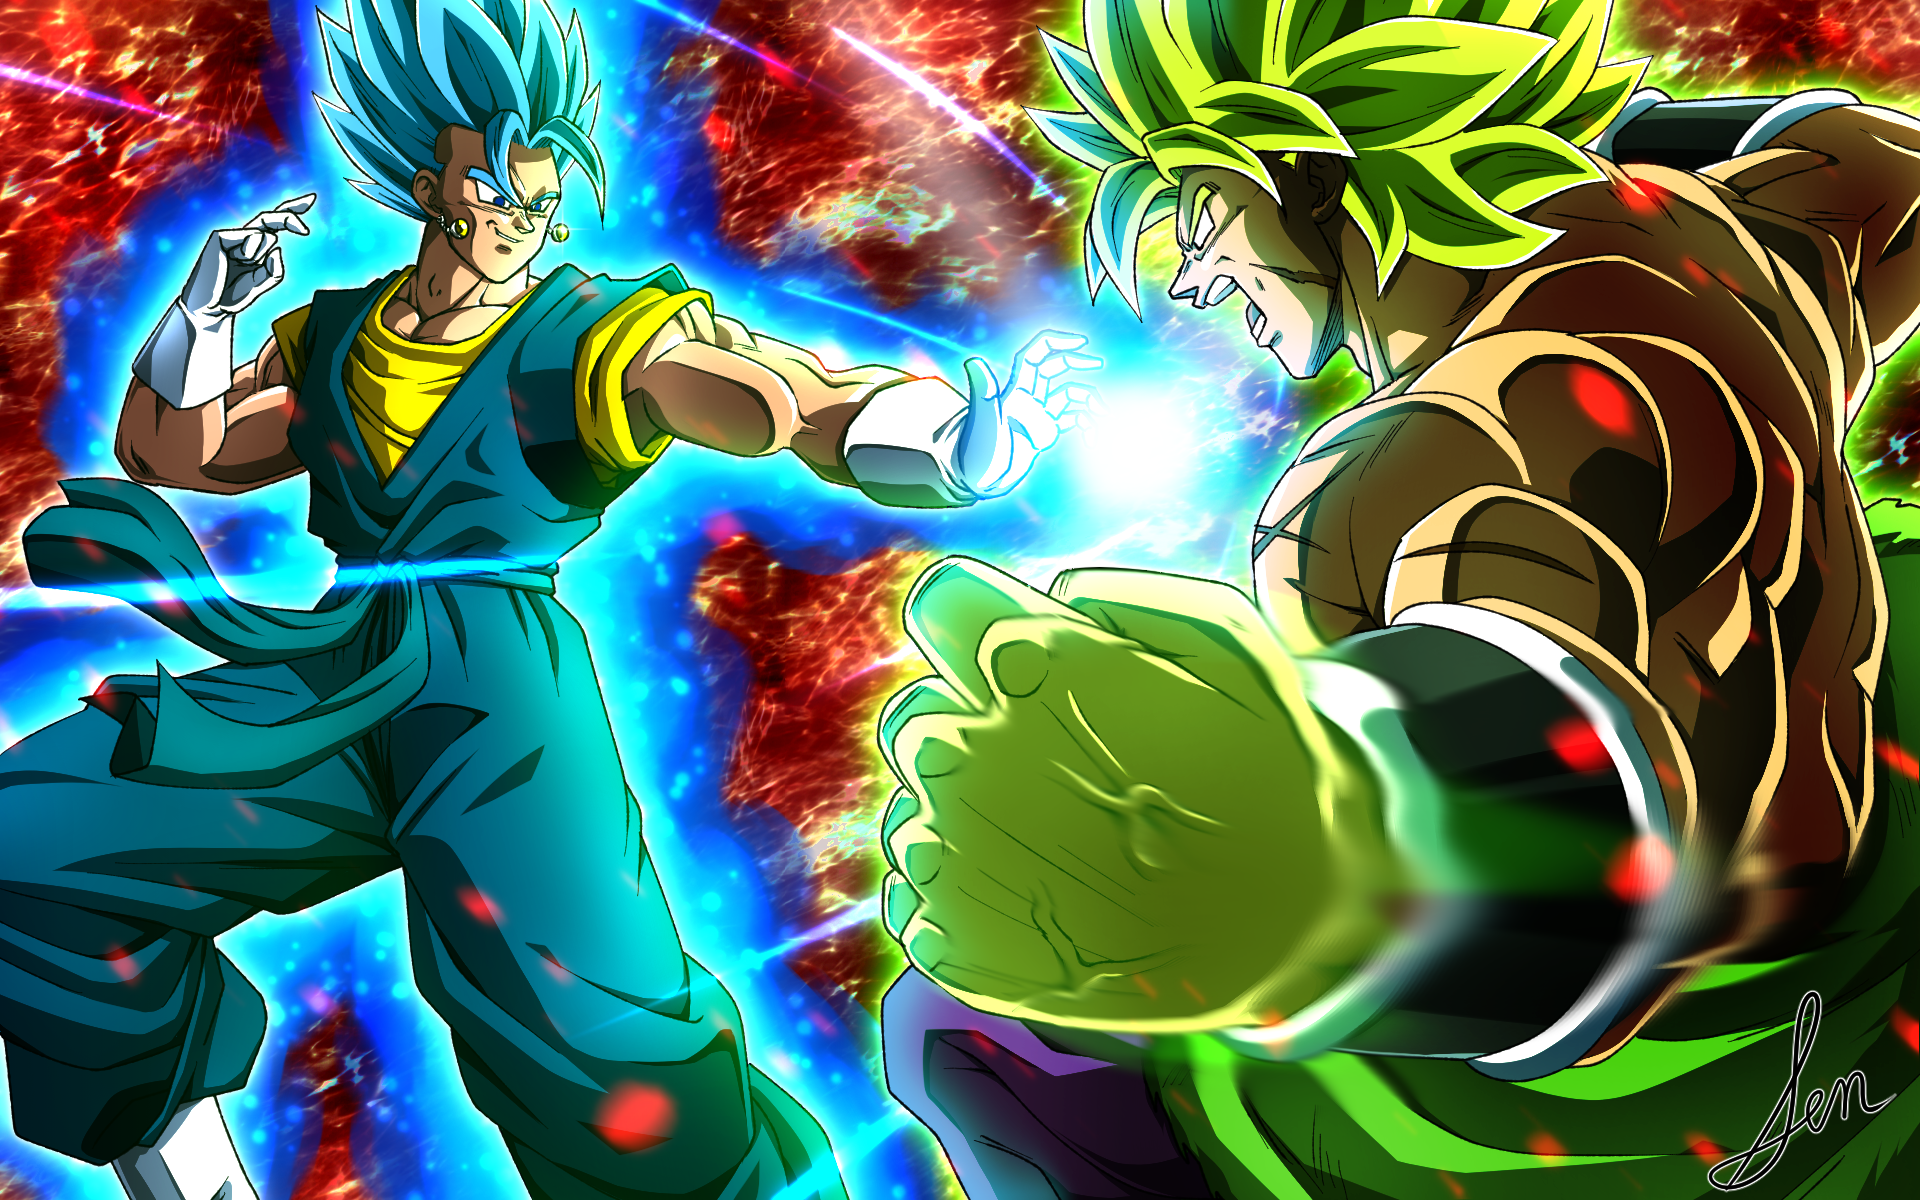 Gogeta SSJ Blue Vs Broly by Duy Anh Nguyen